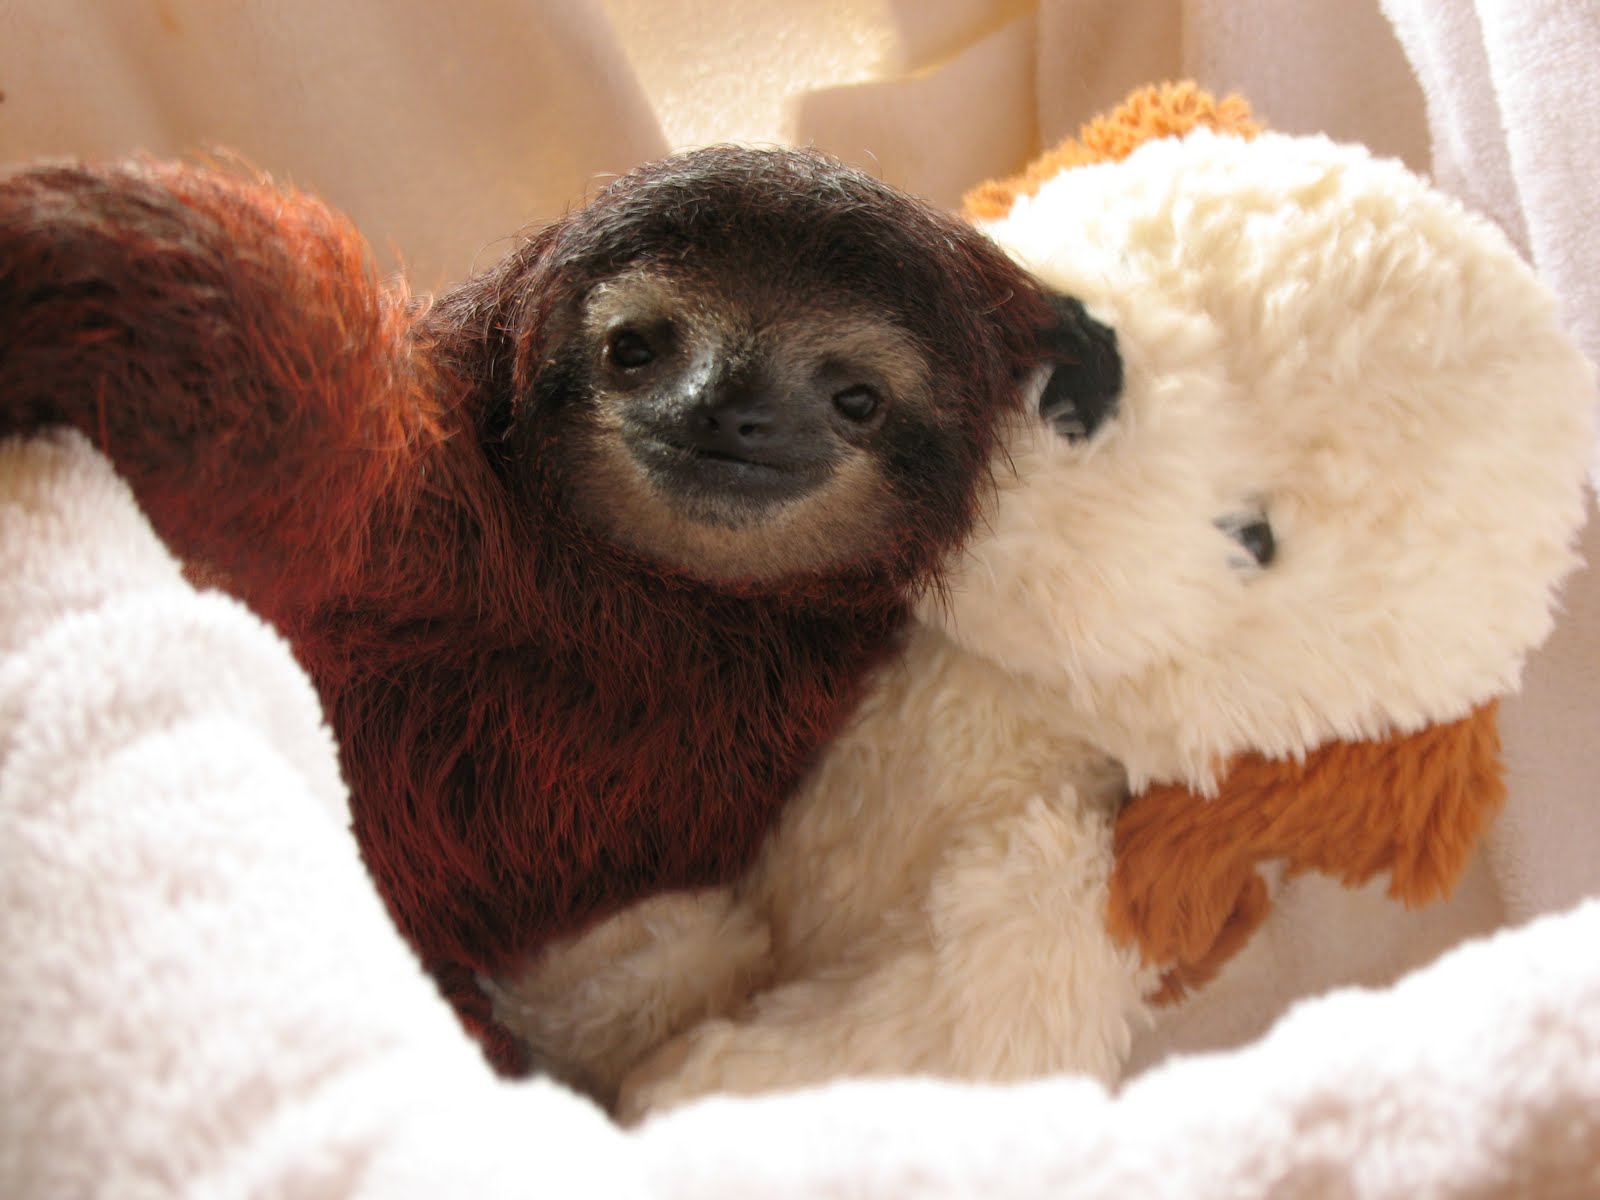 Cute Baby Sloth Pictures In High Definition Or Widescreen